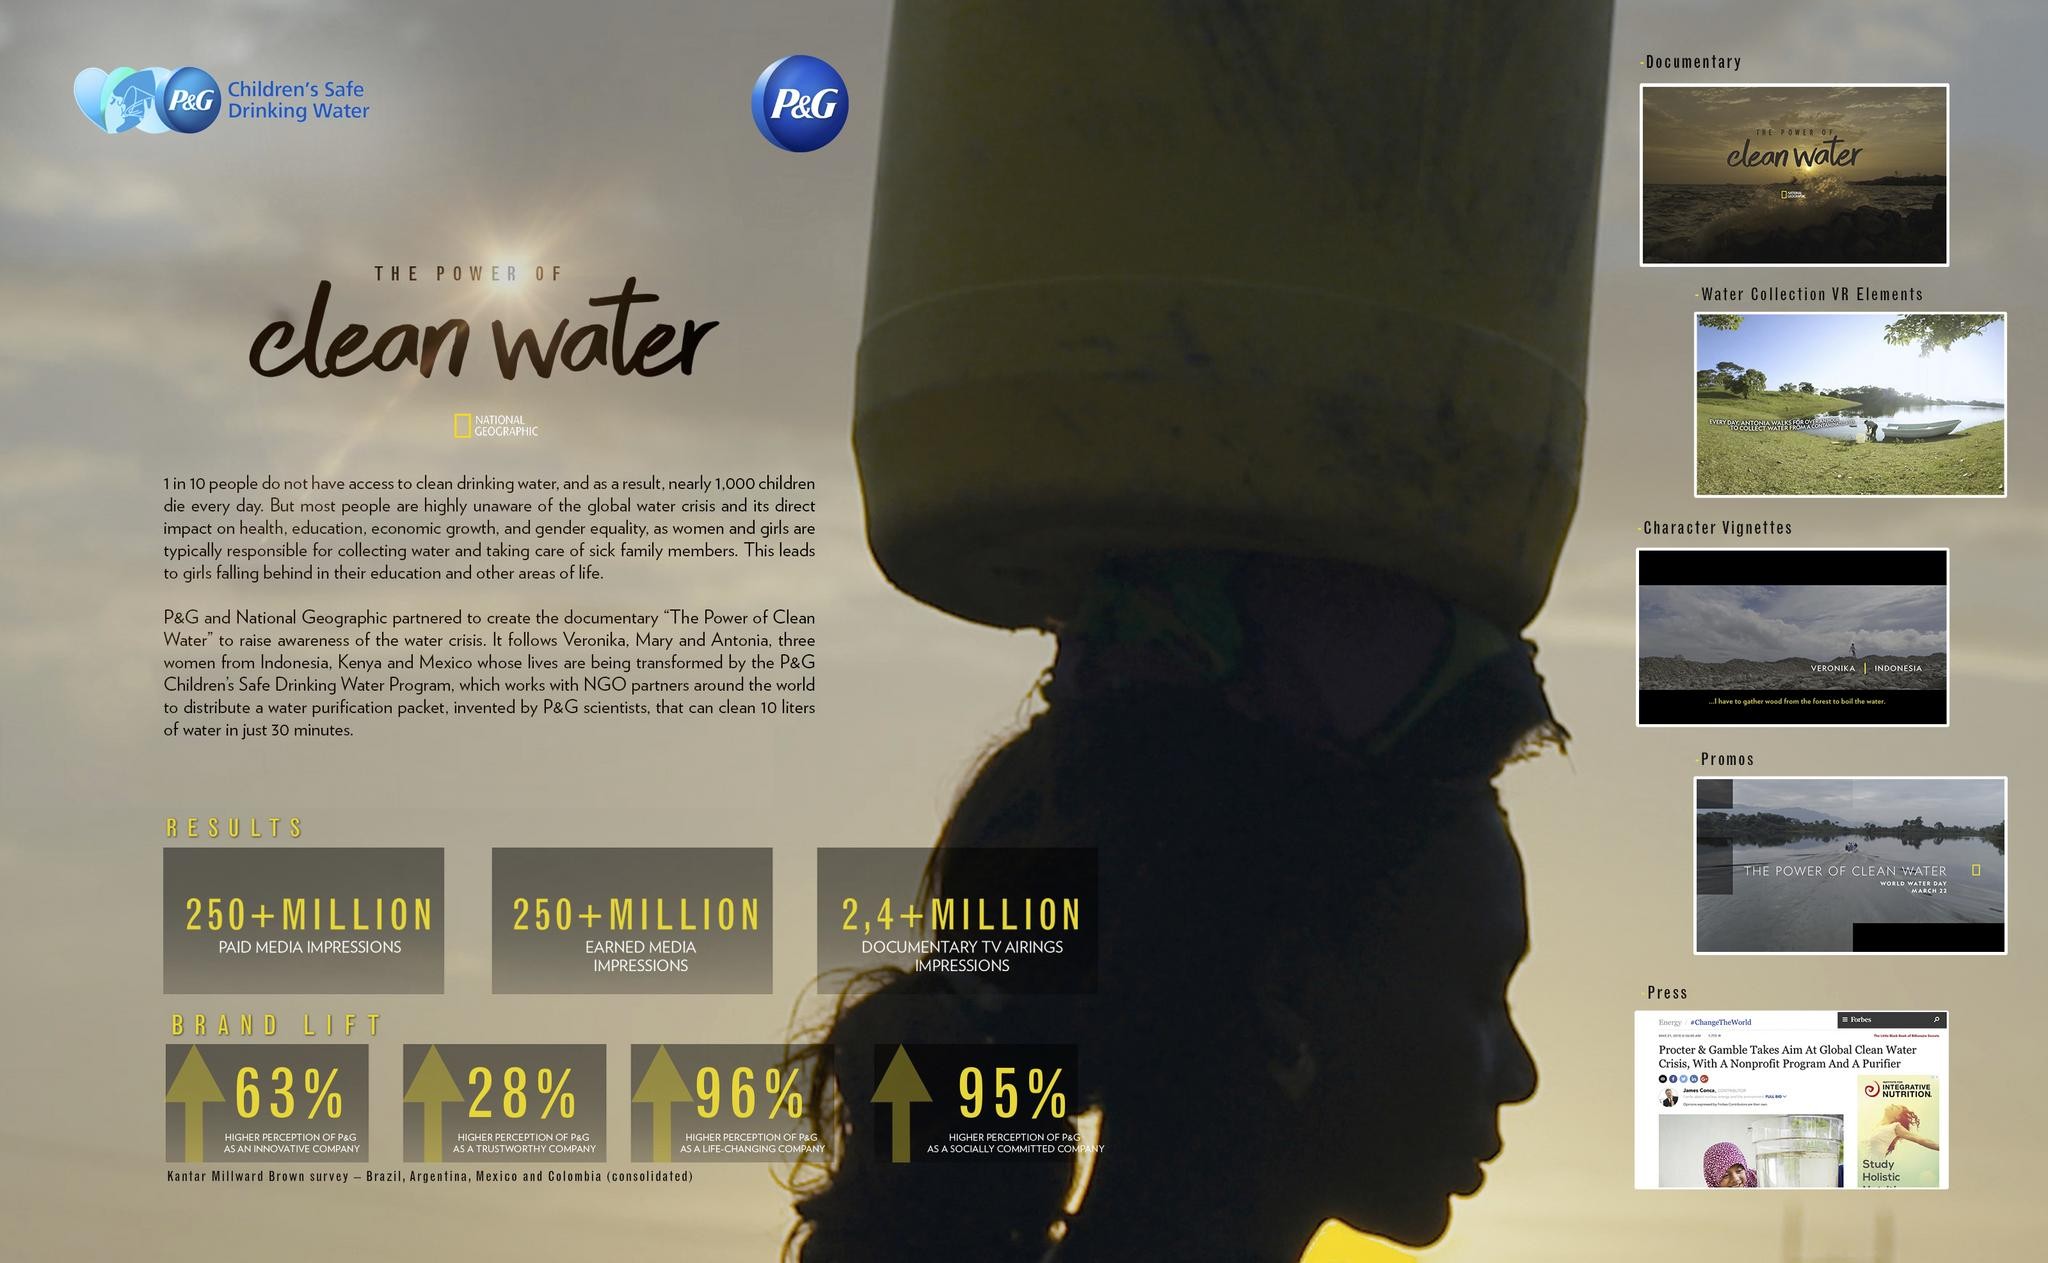 THE POWER OF CLEAN WATER